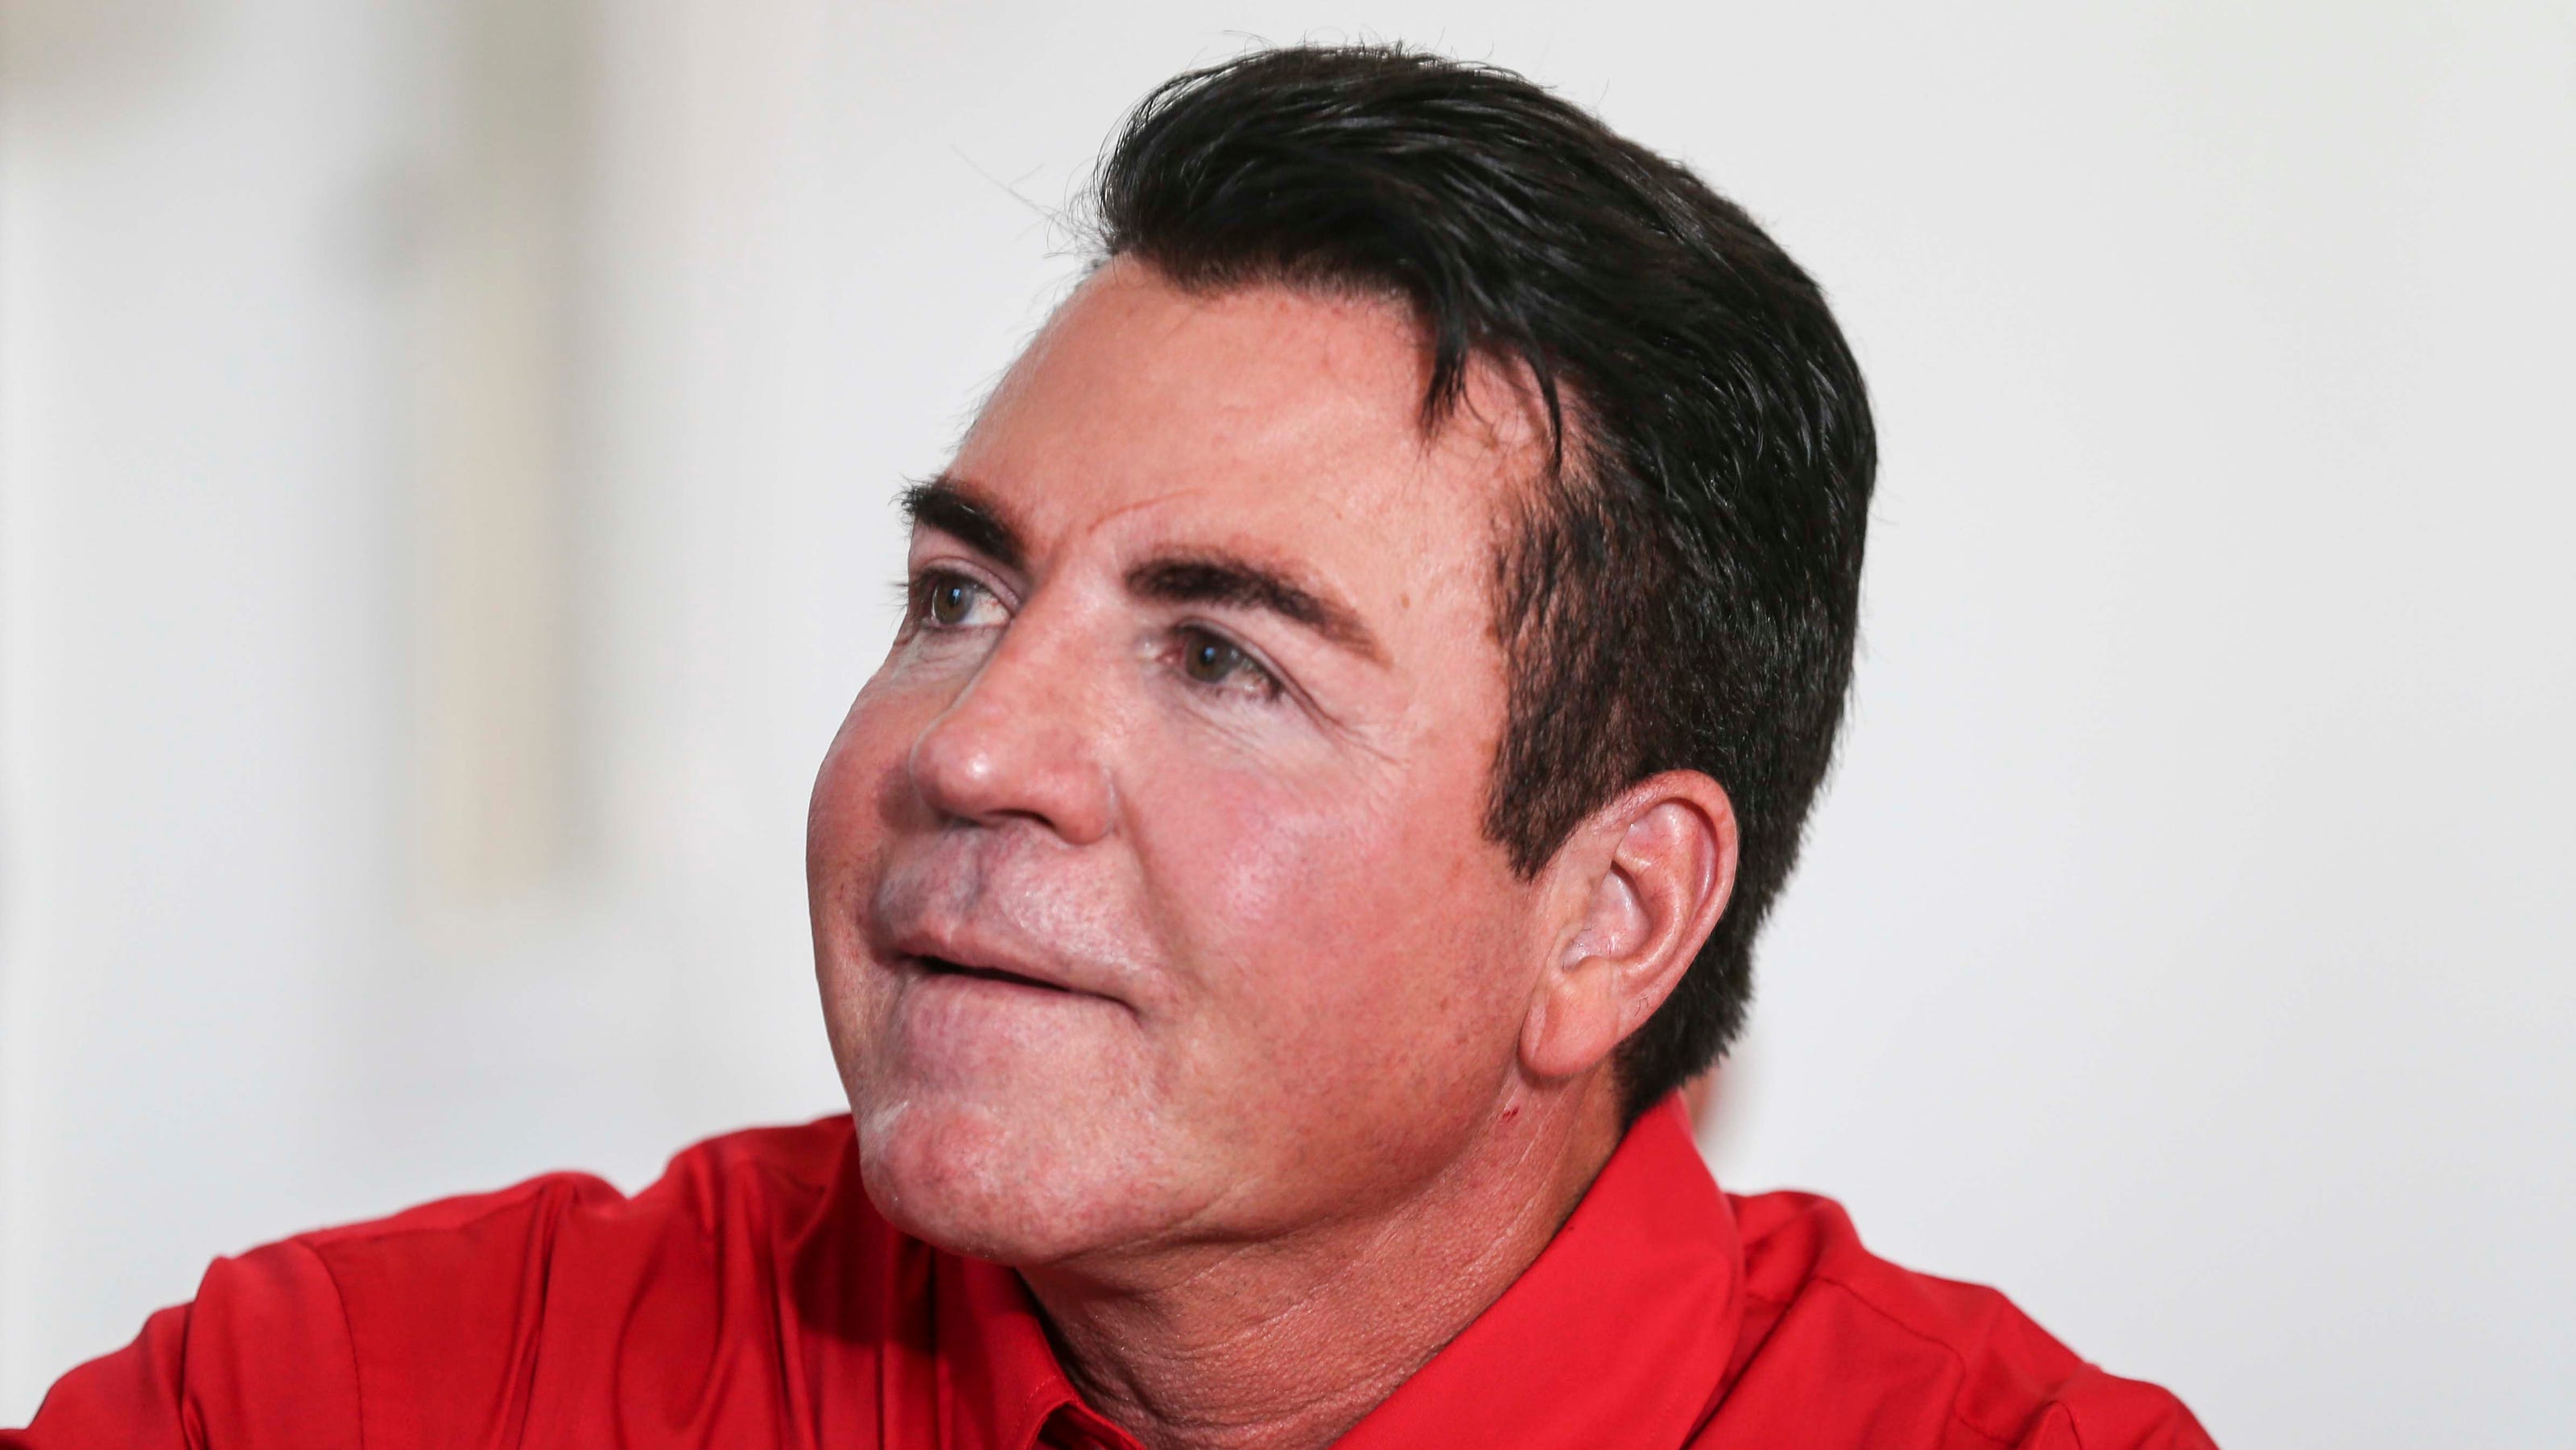 Papa John S Founder John Schnatter Giving 1m To Help Small Businesses